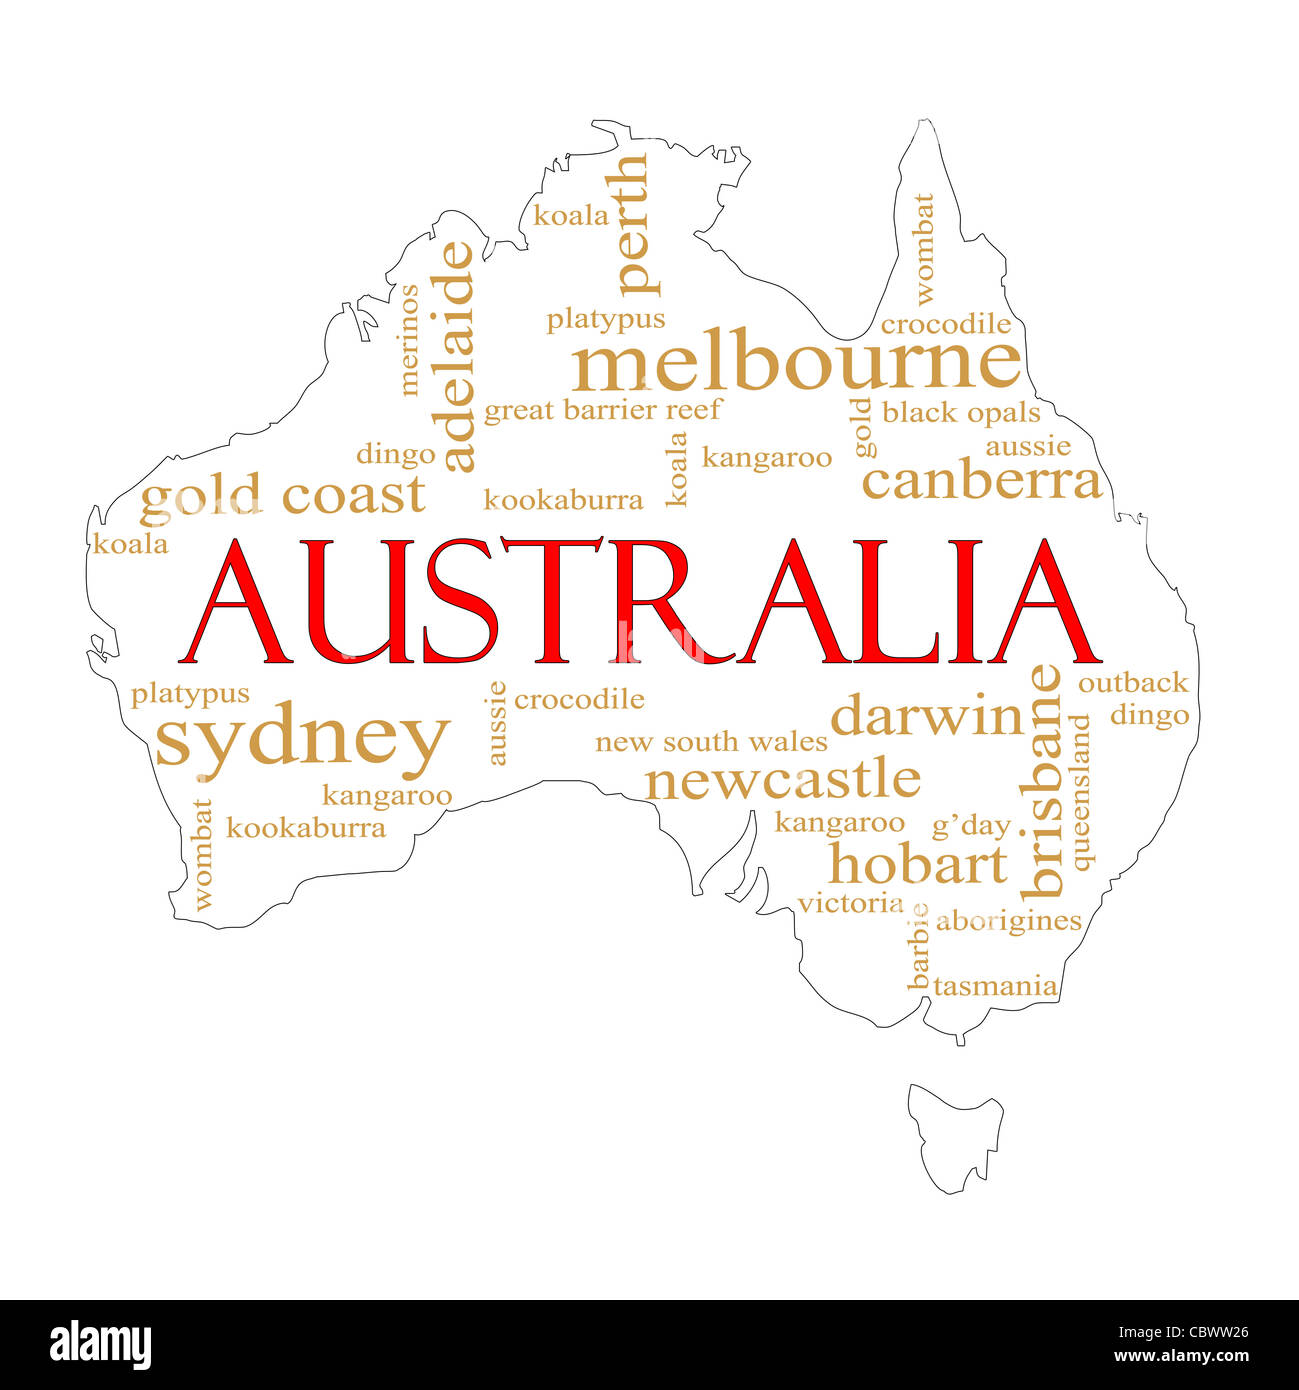 A map of Australia with different Australian terms around it such as Melbourne, Canberra, kangaroo, aborigines, Darwin and more Stock Photo